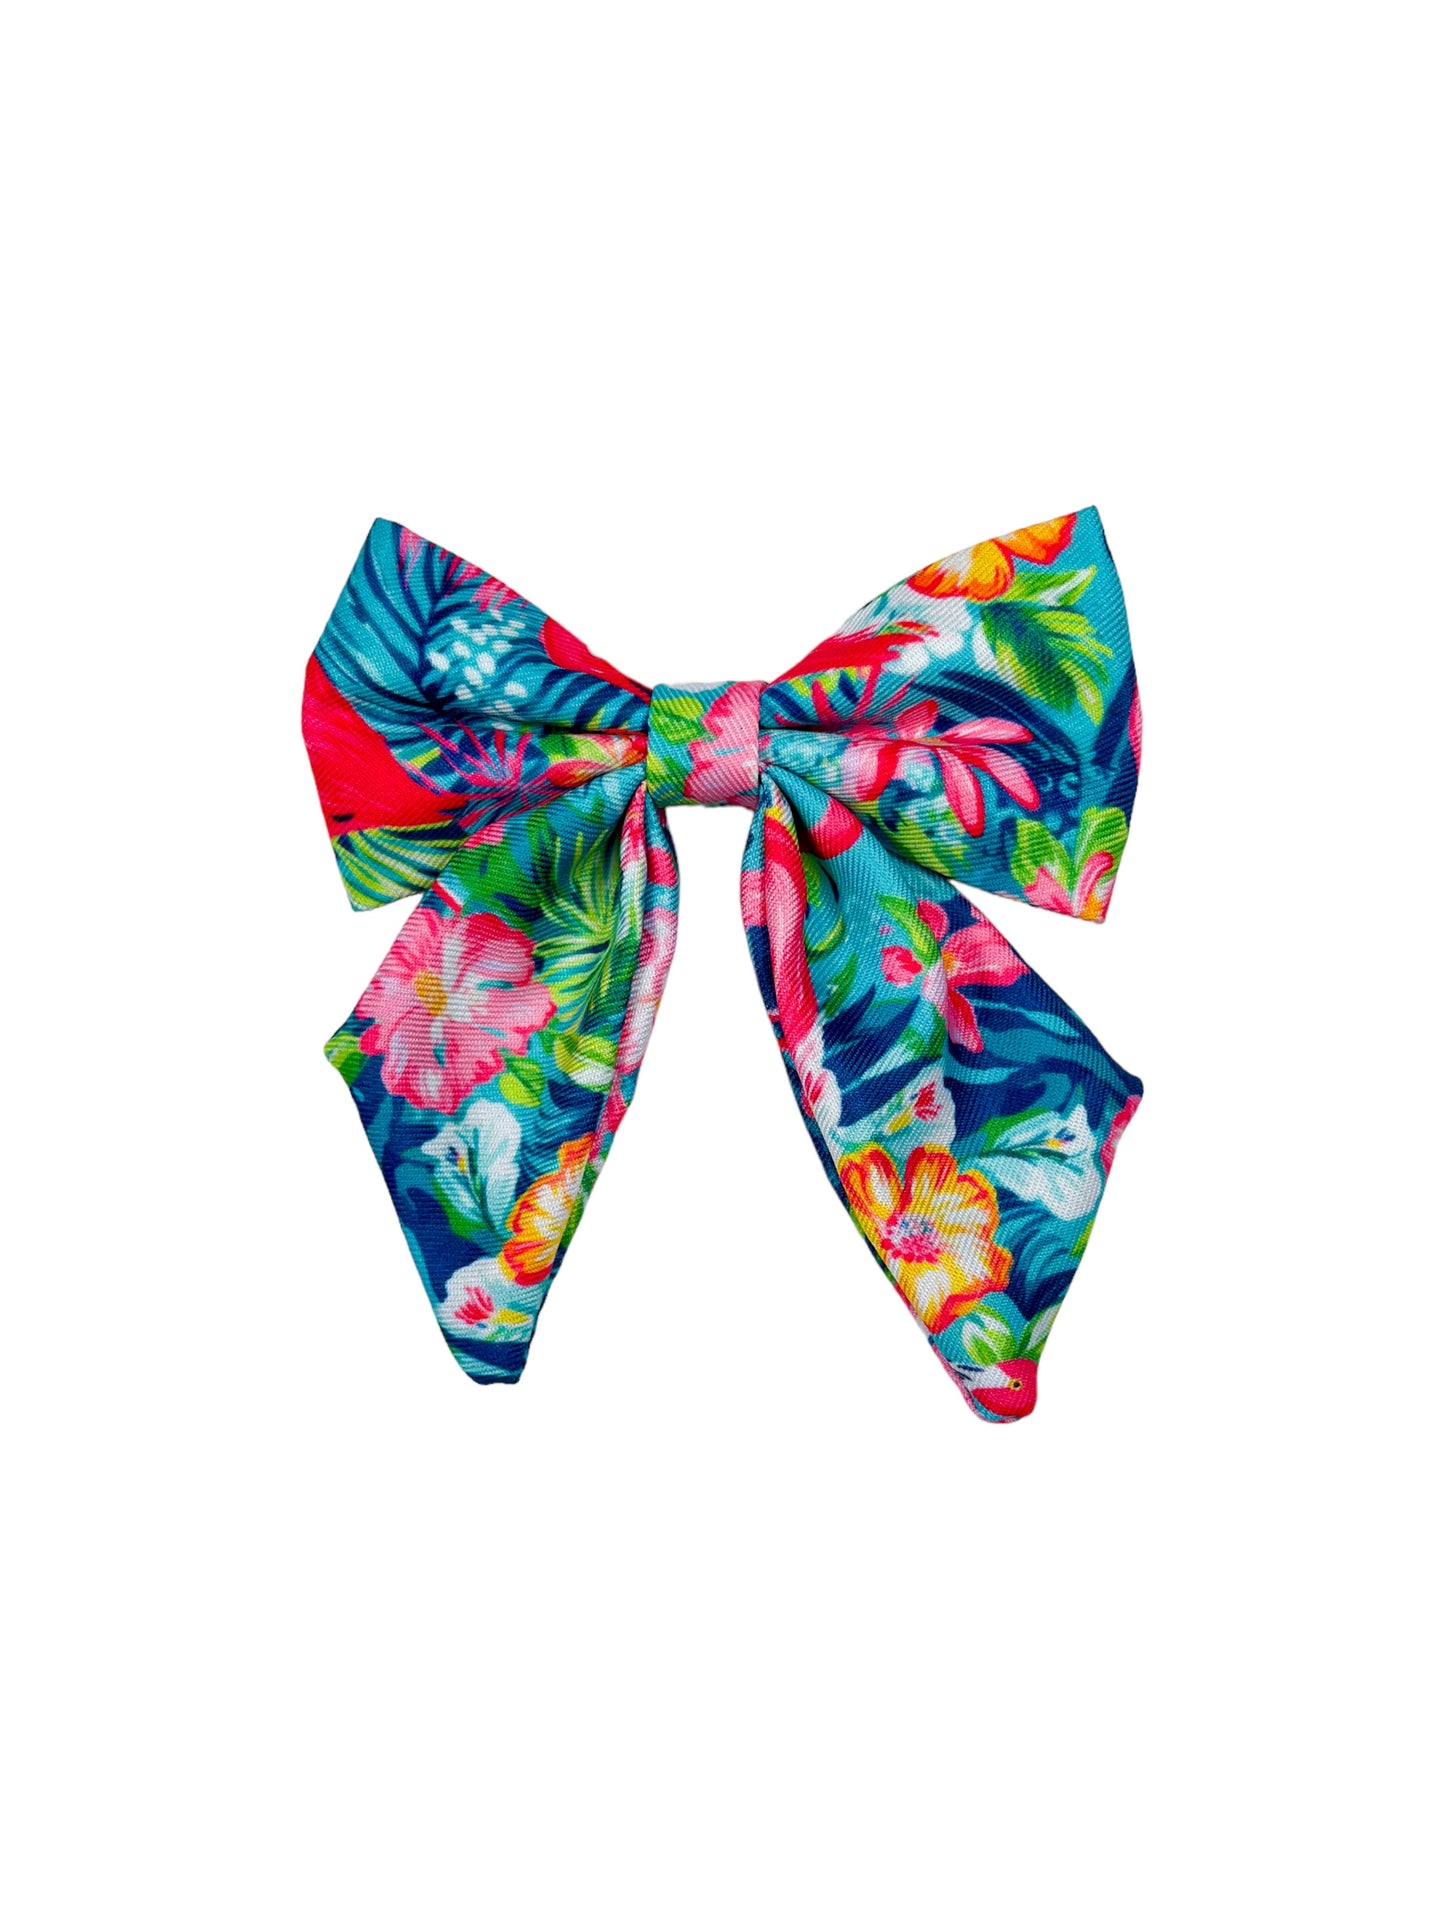 The Tropical Pawradise Bow Tie